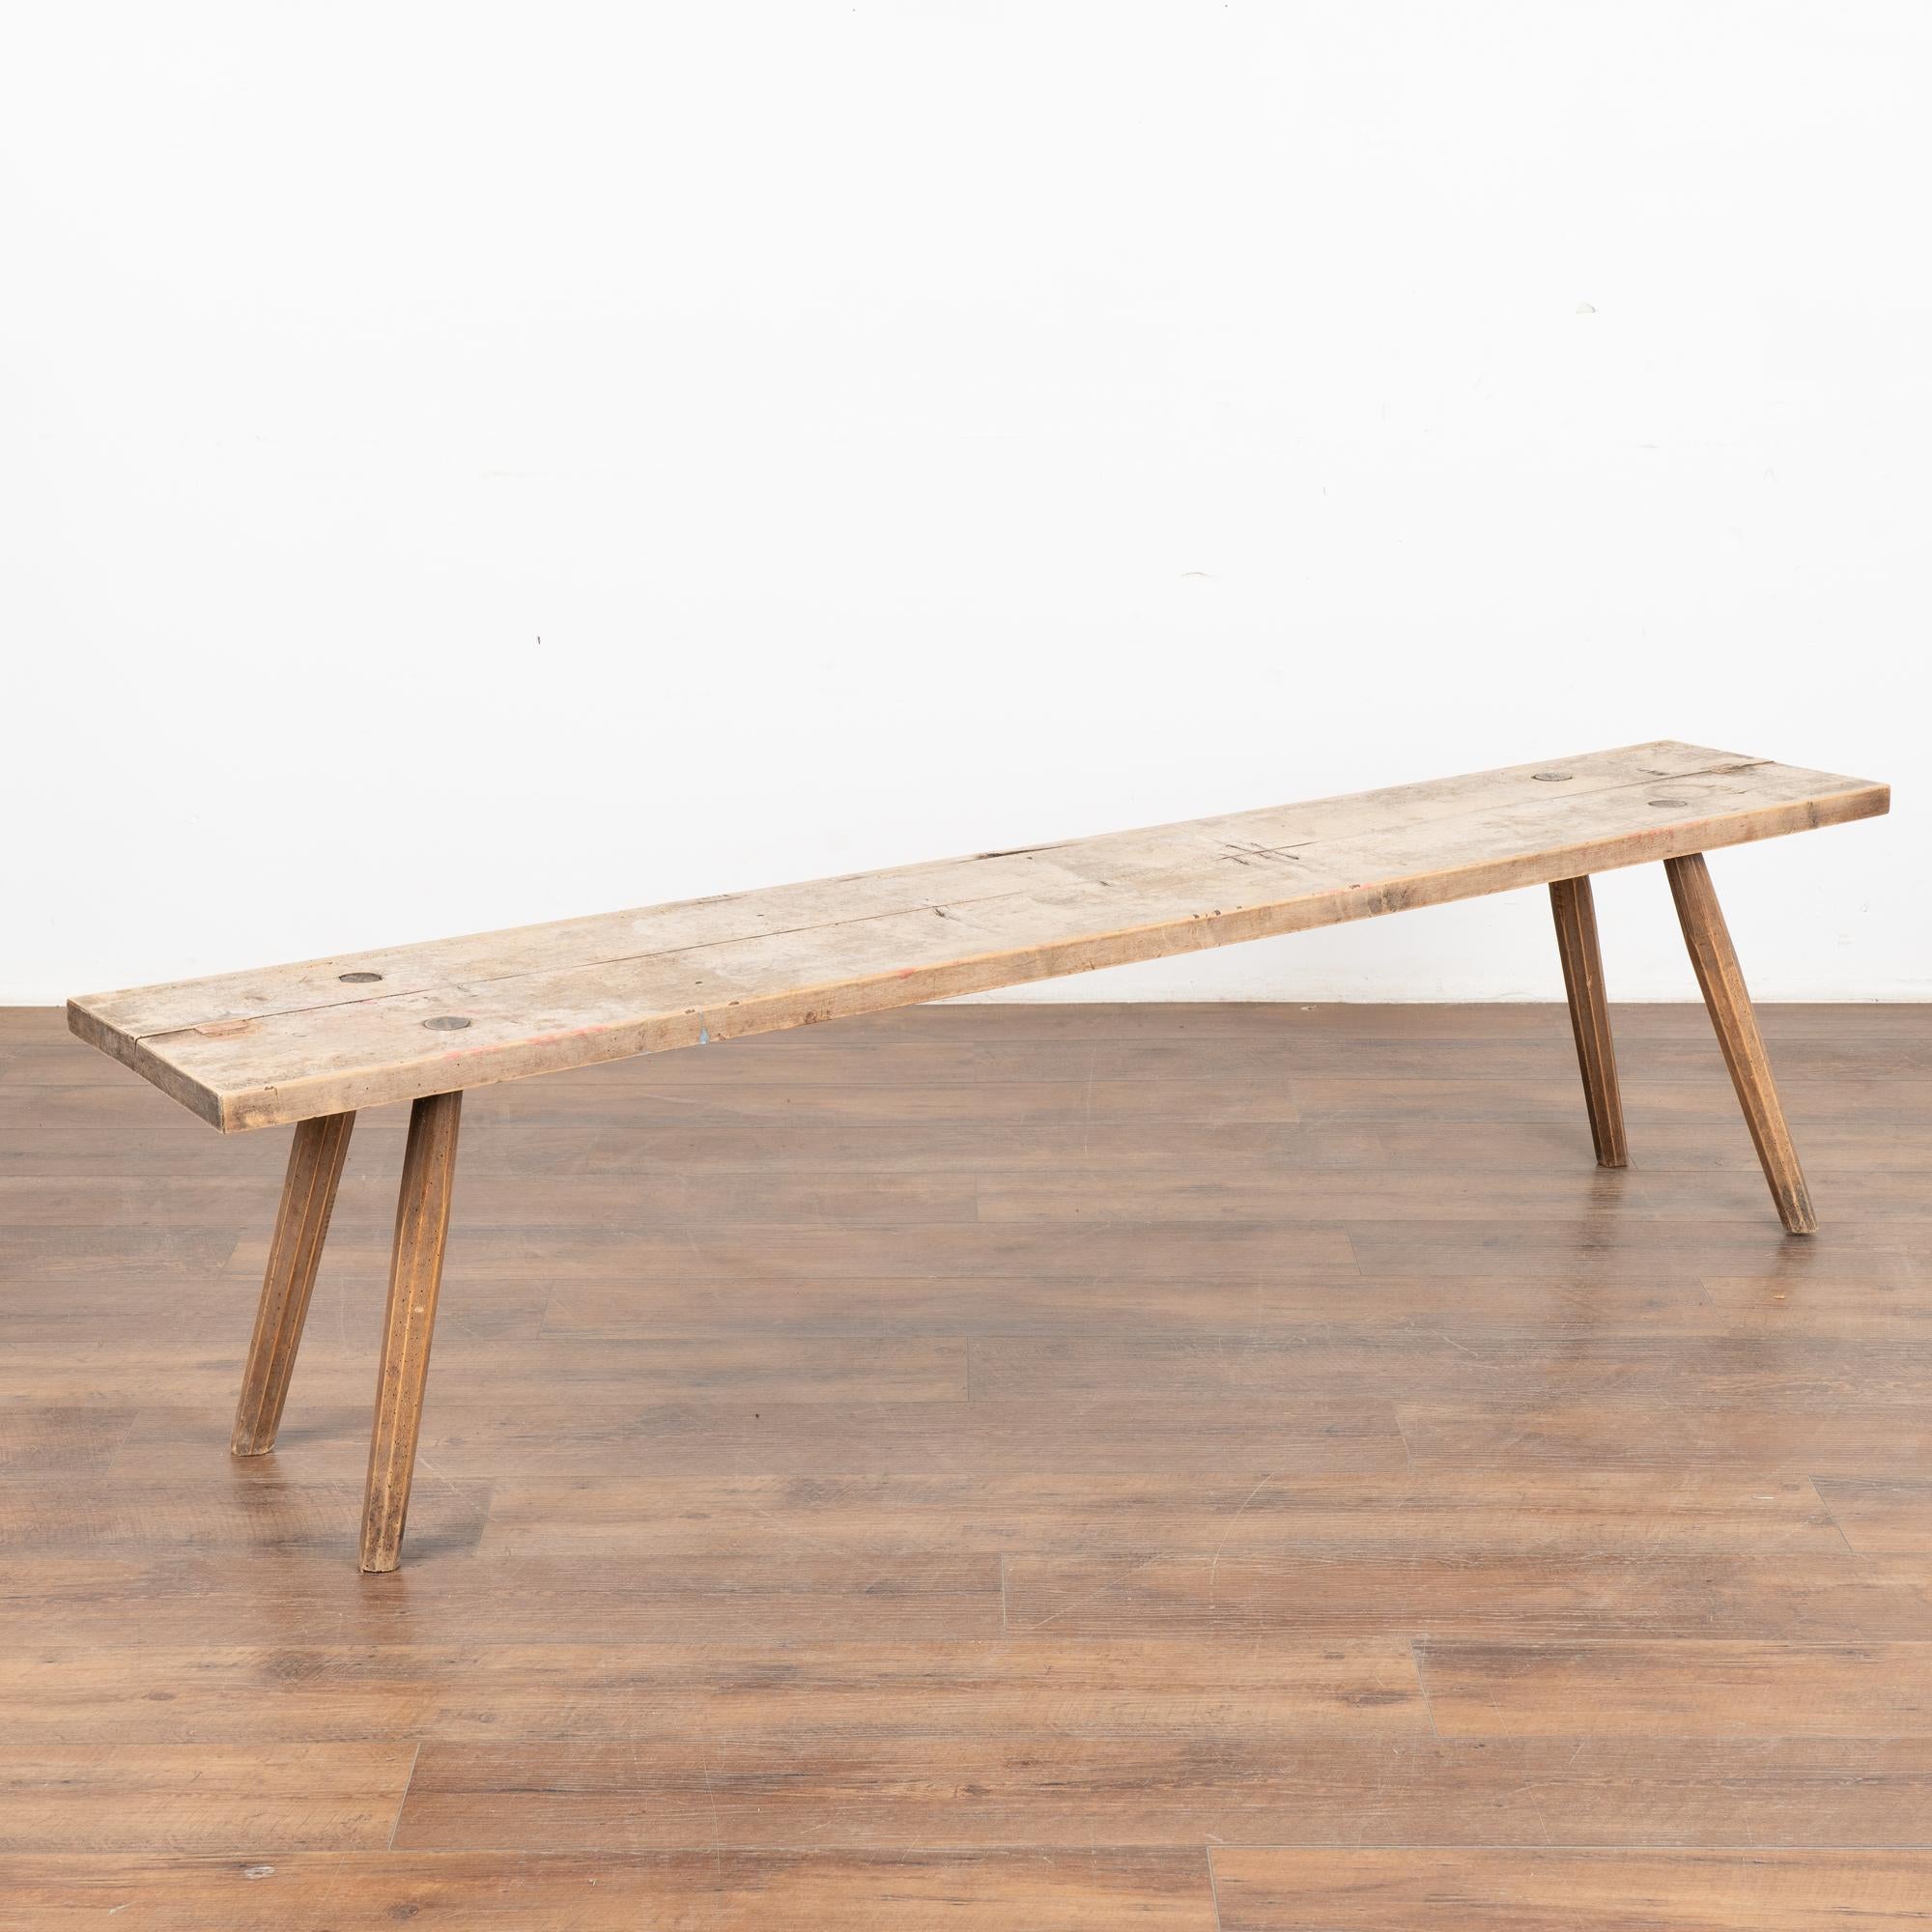 Rustic plank top bench with splay peg legs, just under 6.5' long.
The top reveals generations of use with cracks, nicks, stains and old dried worm holes which add character to the narrow bench.
Restored and waxed, this bench is strong, stable and